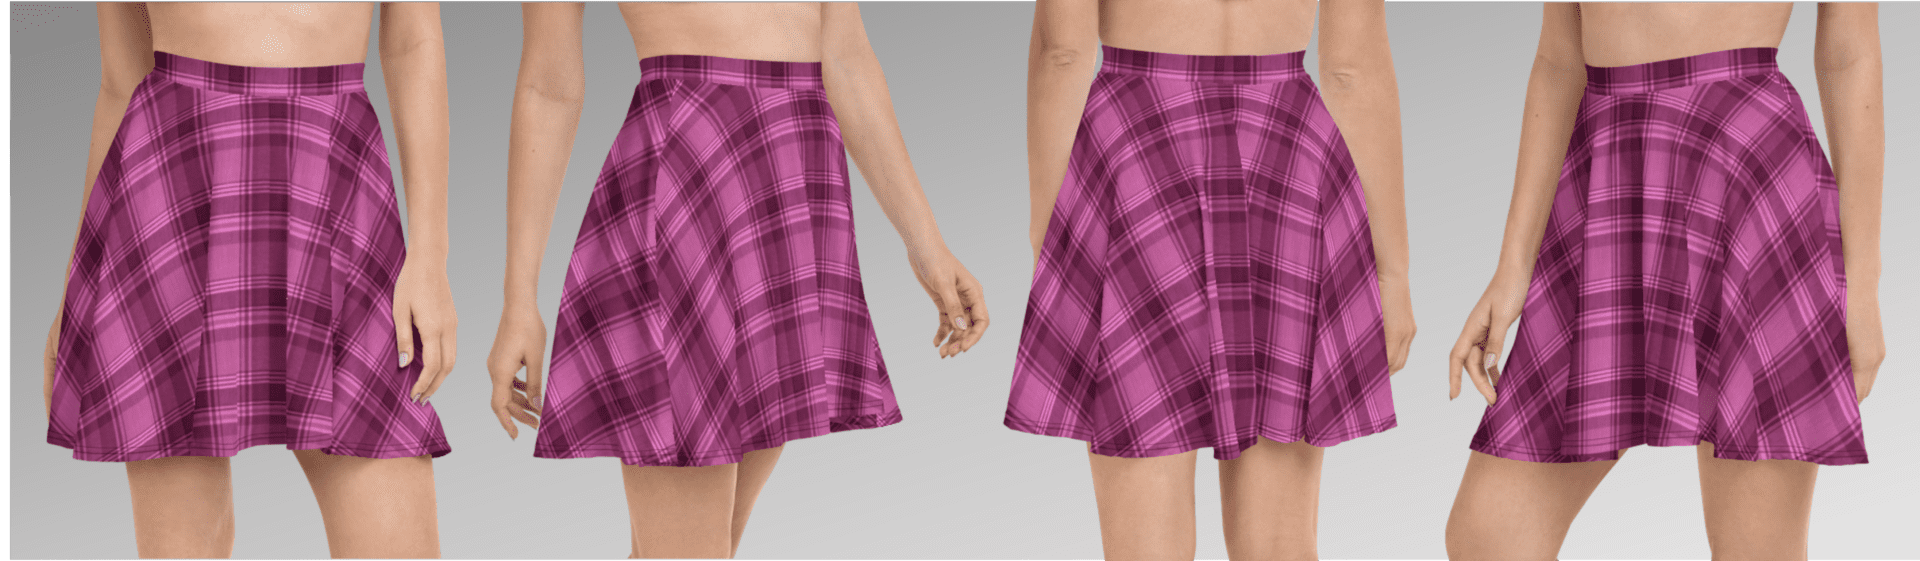 Pink and purple plaid skater skirt.